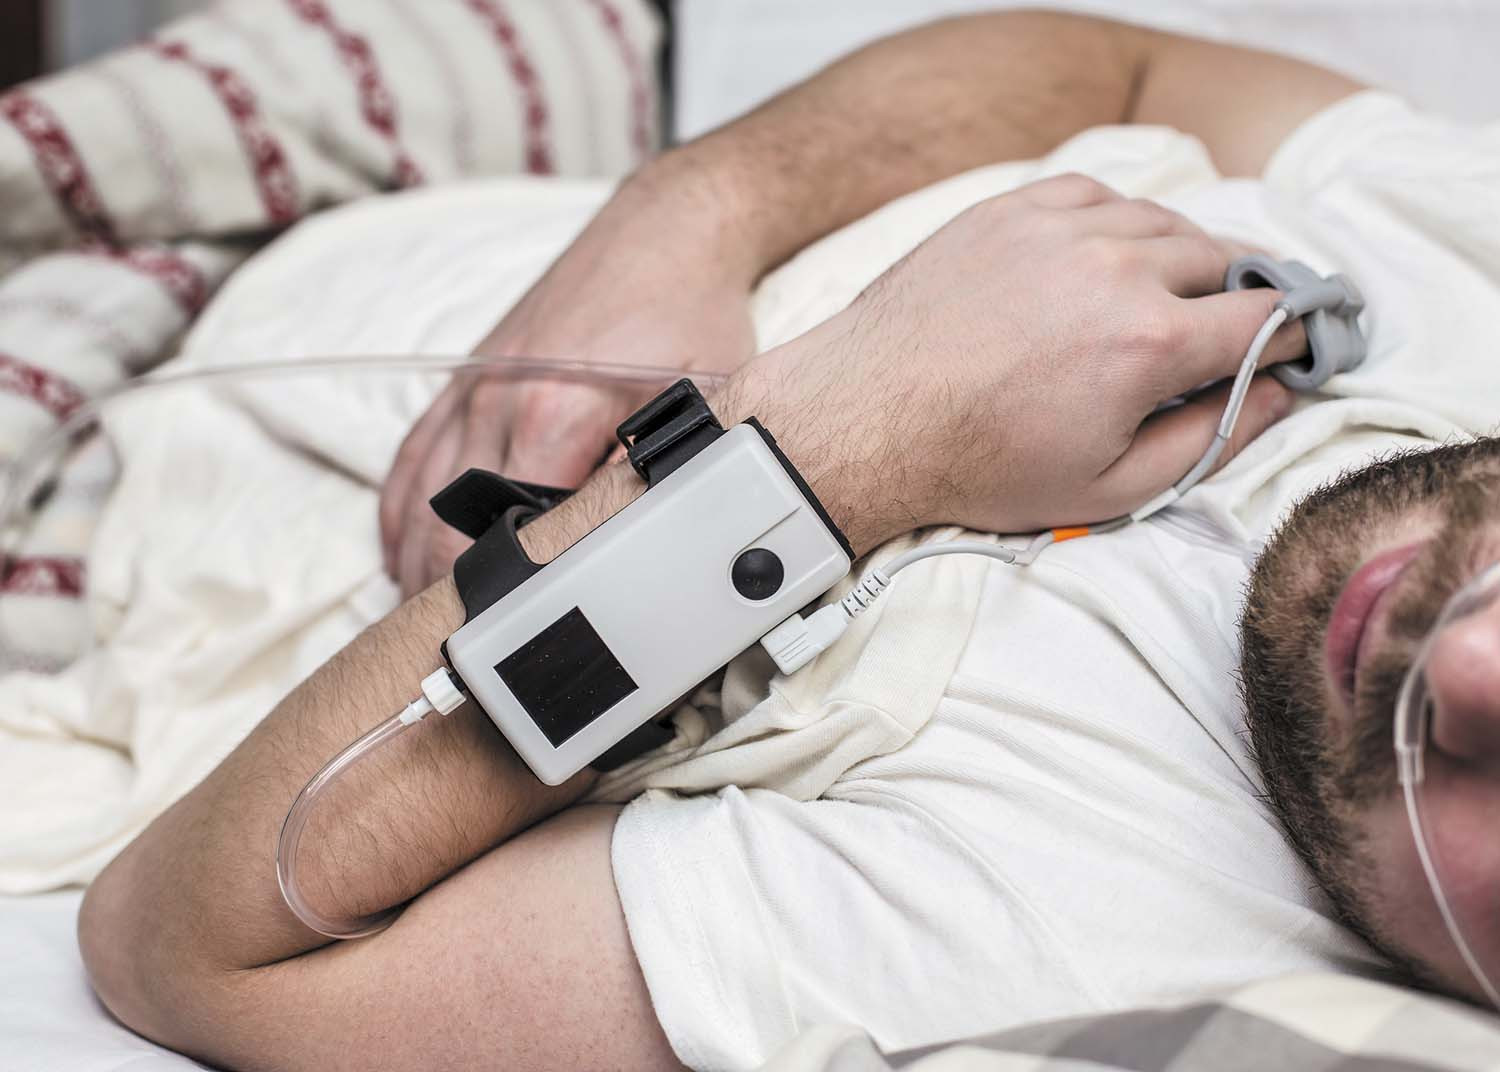 photo of a man sleeping while taking a sleeping test; a device attached to his wrist that records data while he sleeps